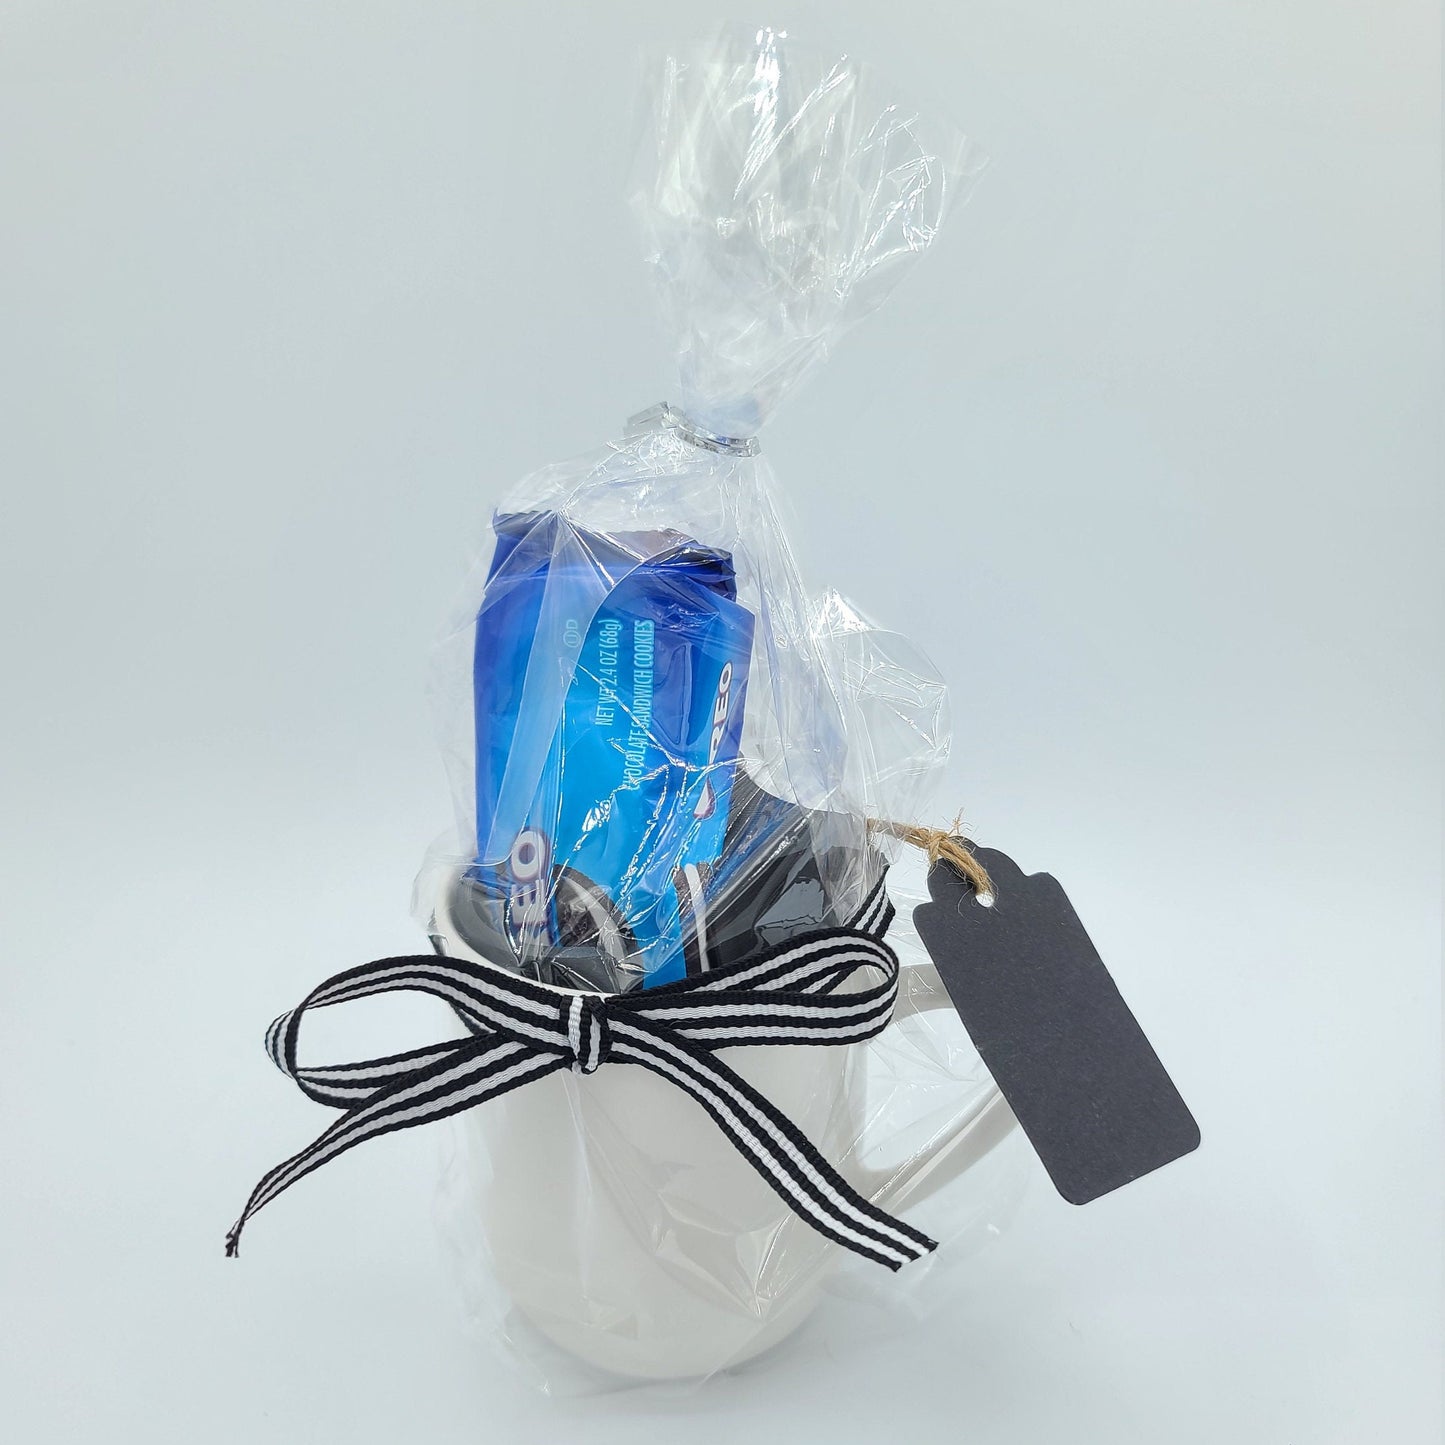 Oreo Cookie Gift Set | Cookie Holder